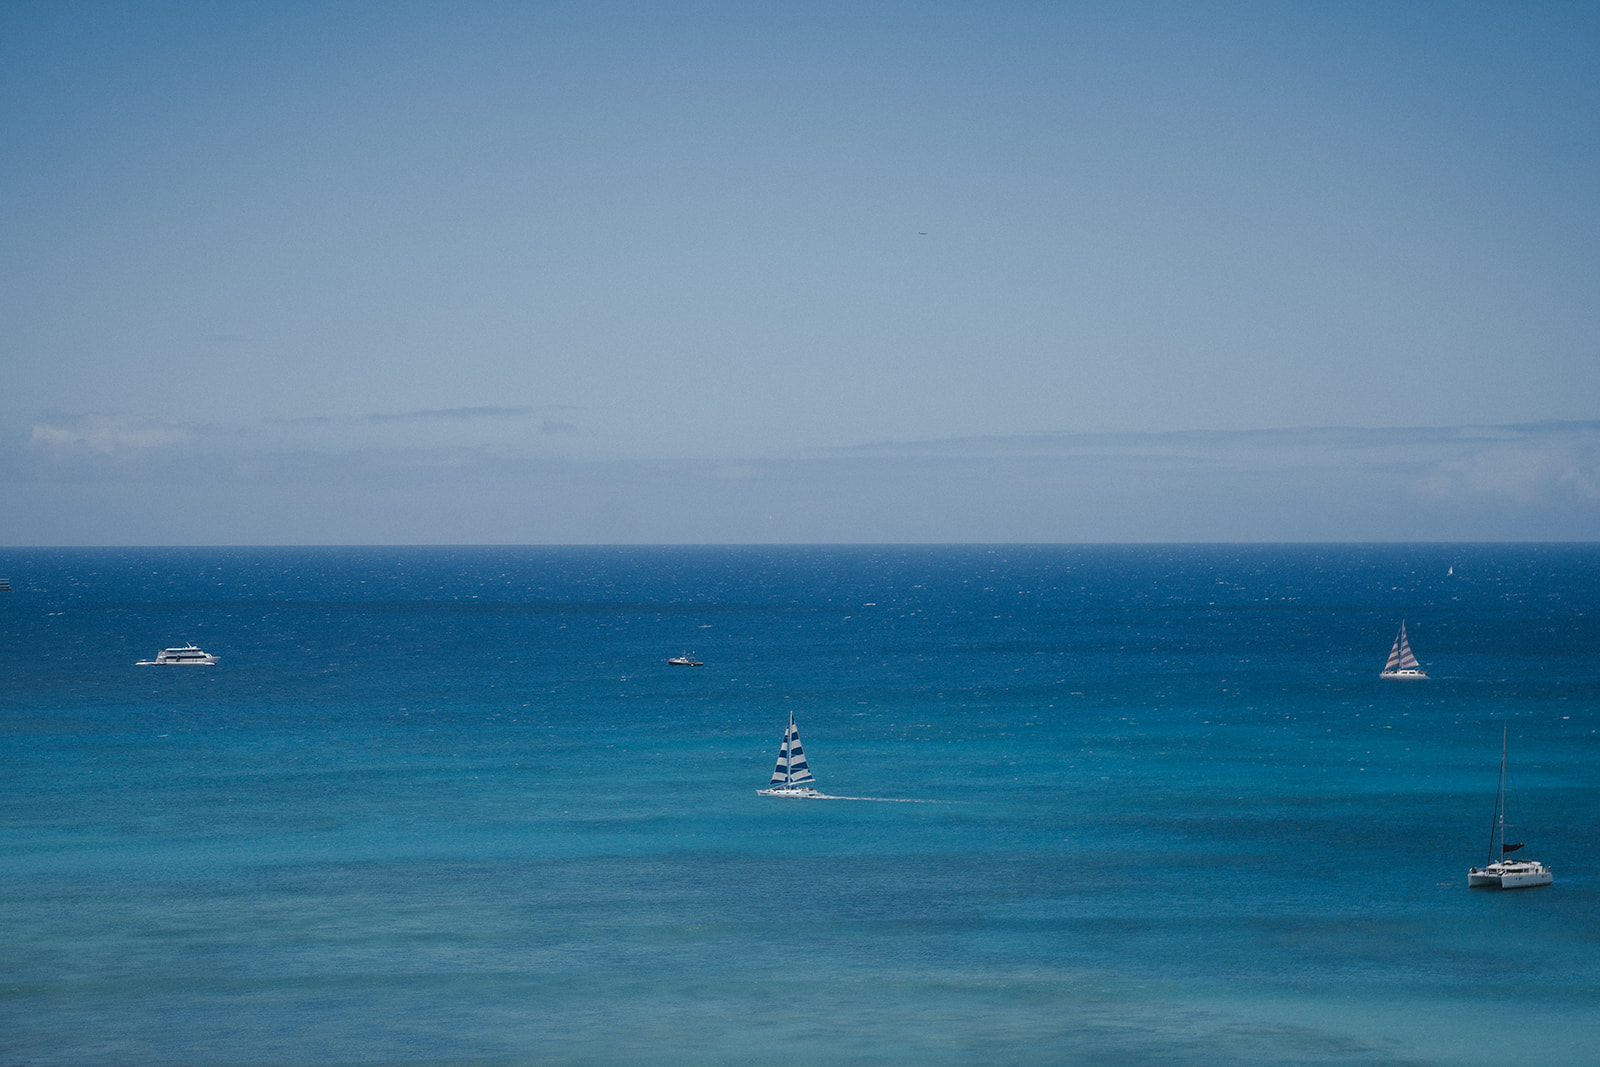 Sail boat in a sea of blue